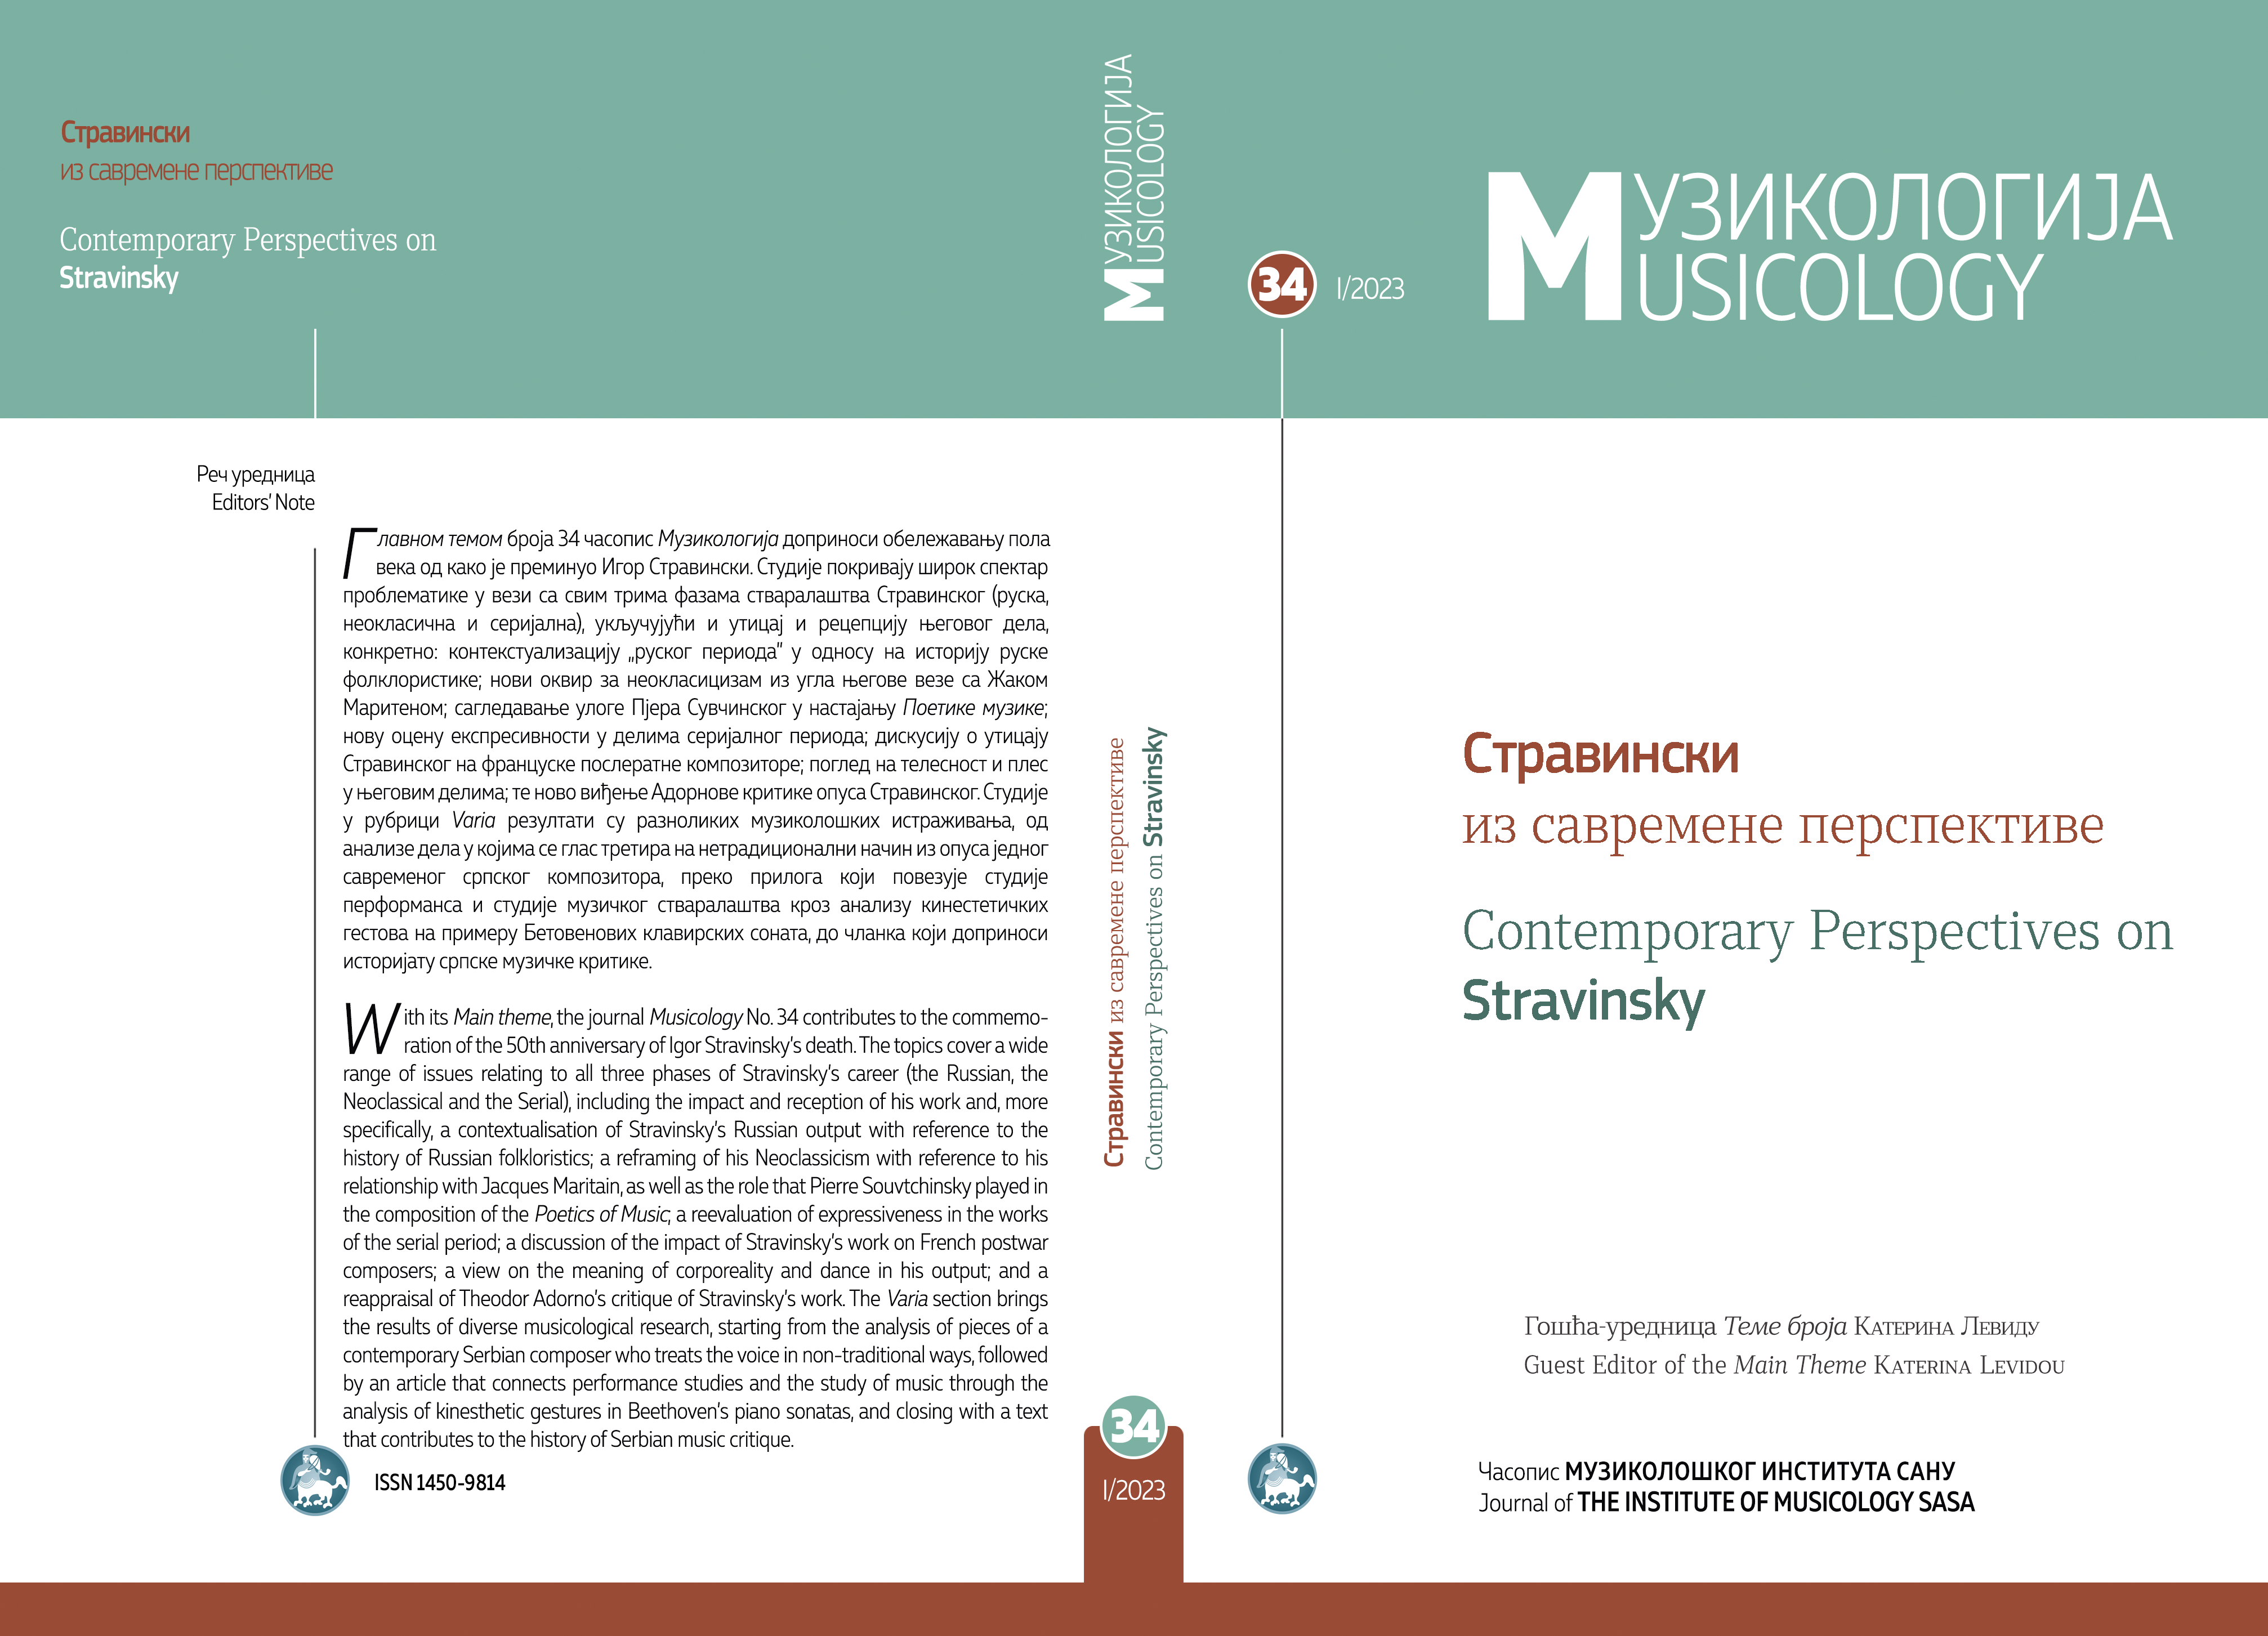 Sakharov, Kireevsky, Afanasyev and Others: Stravinsky in the Context of Russian Folkloristics Cover Image